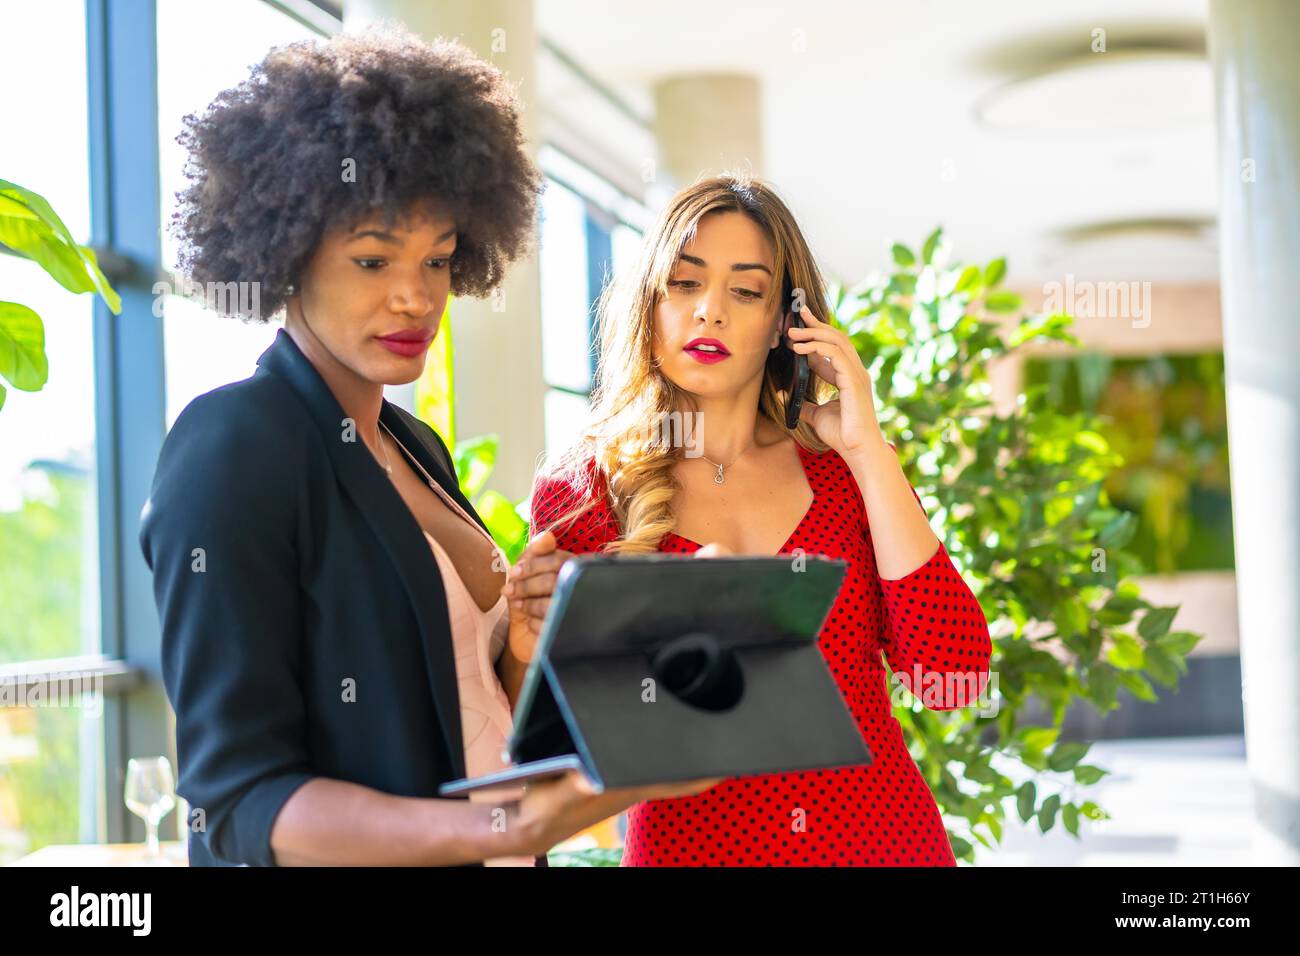 Young enterprising girls, Caucasian blonde and black skinned girl with afro hair making a work video call with a tablet. Lifestyle, working with good Stock Photo